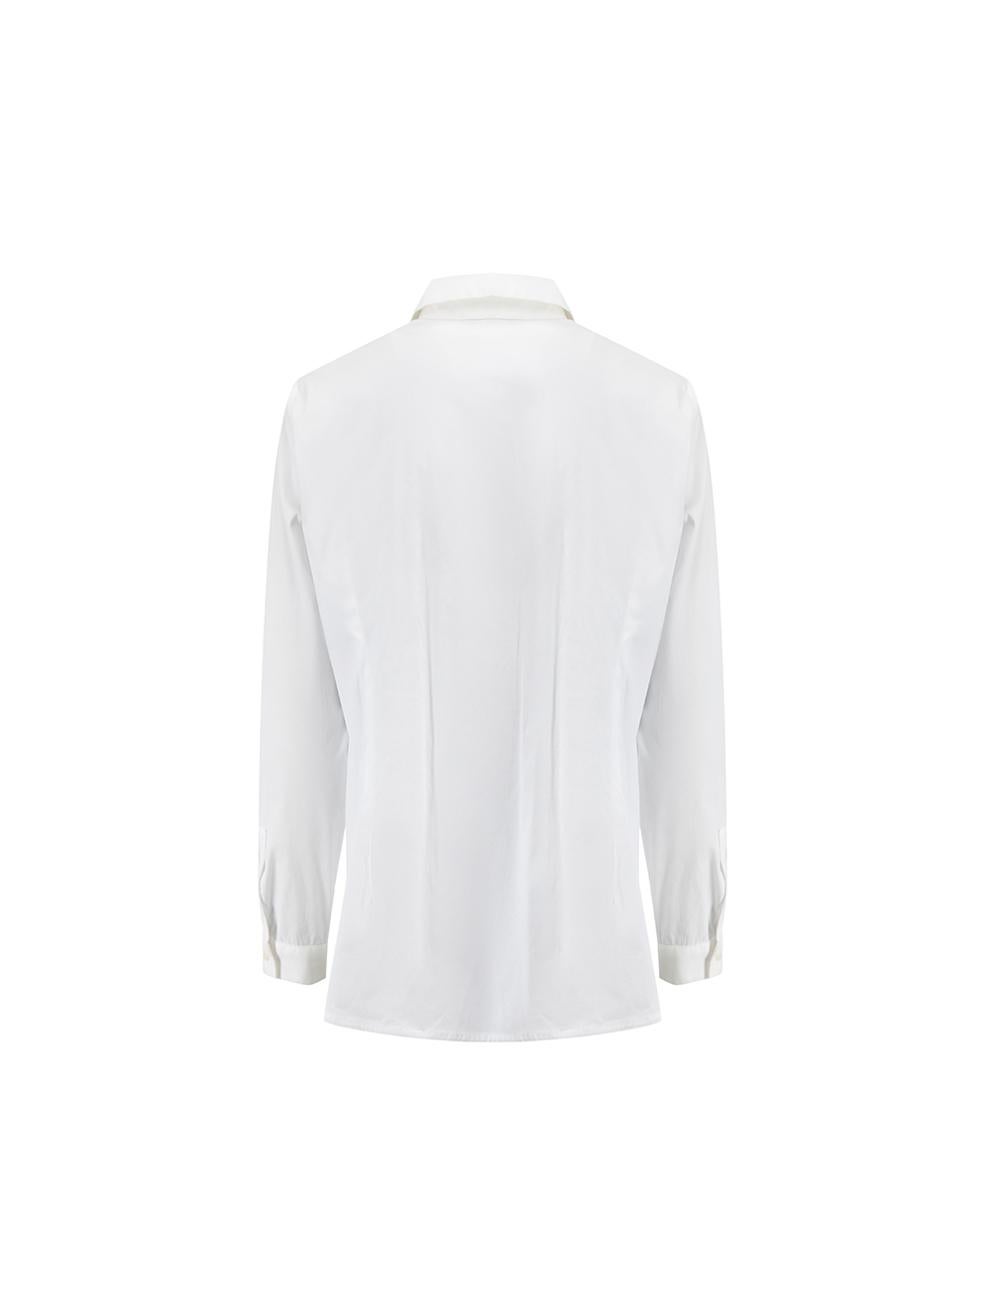 Fabiana Filippi White Cotton Crystal Trim Shirt Size L In Good Condition For Sale In London, GB